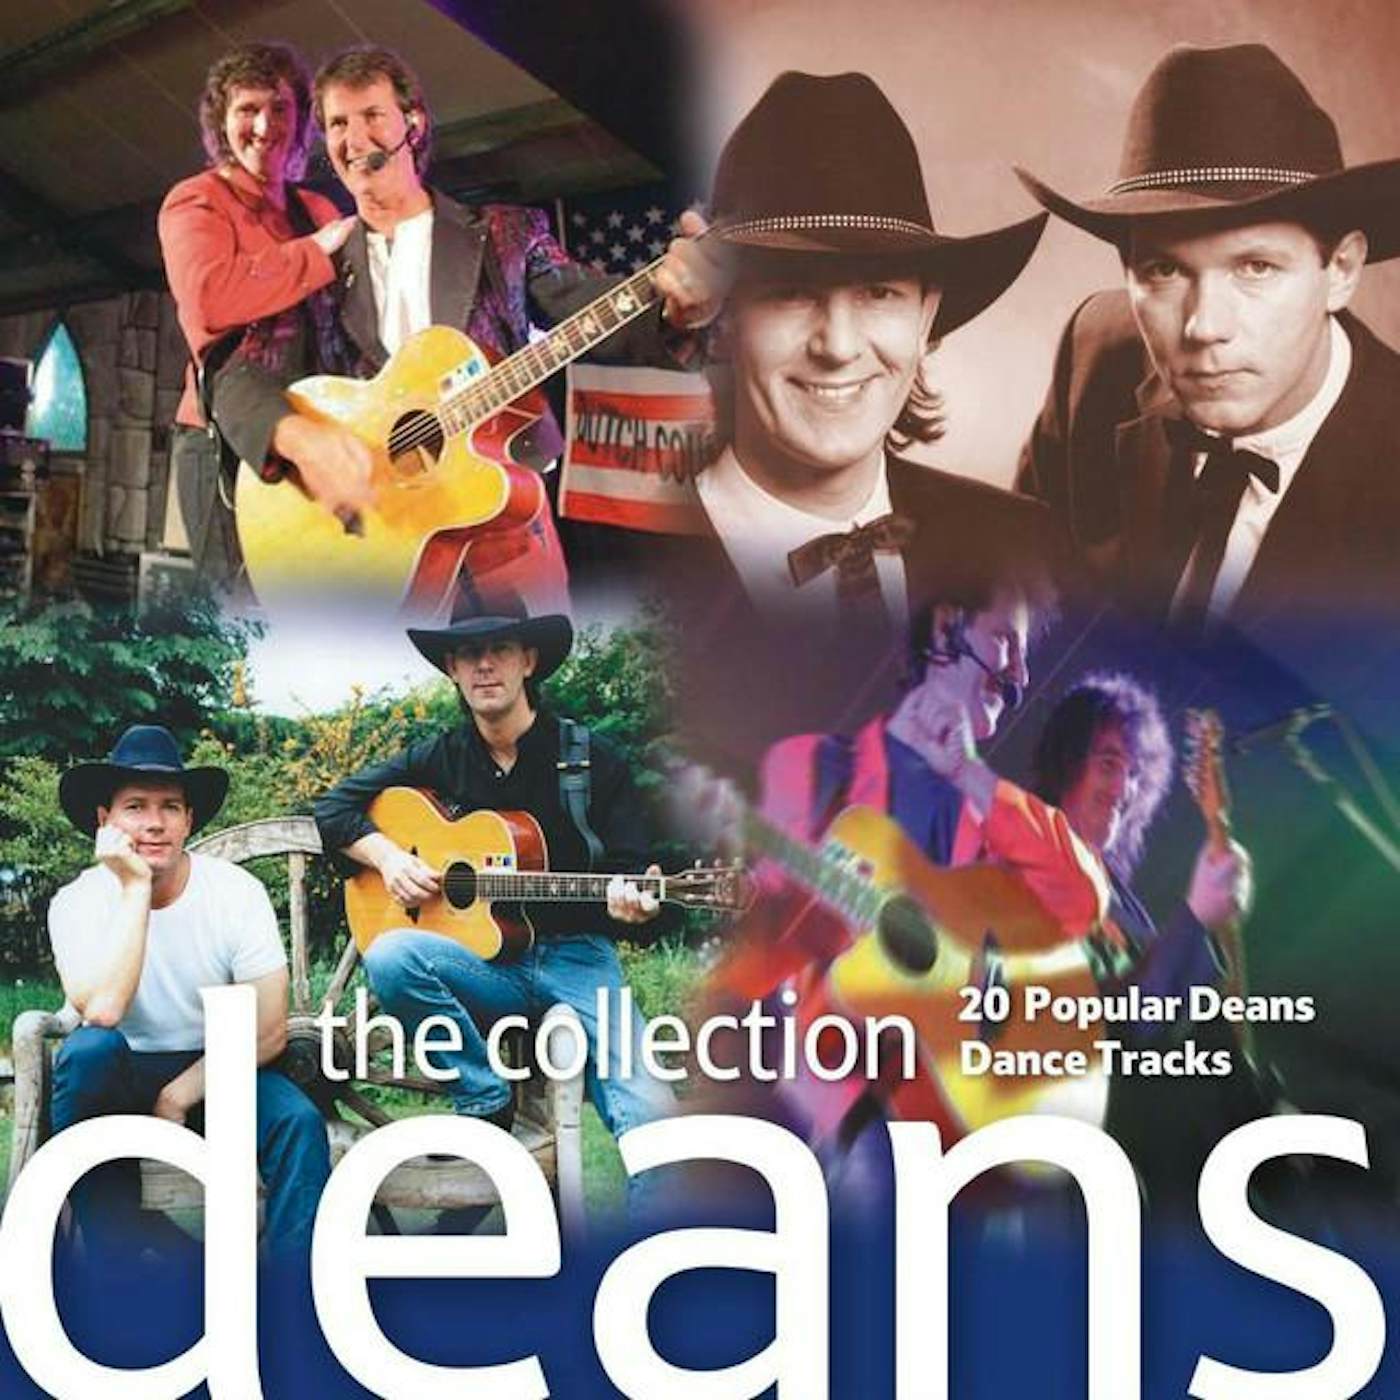 The Deans Brothers